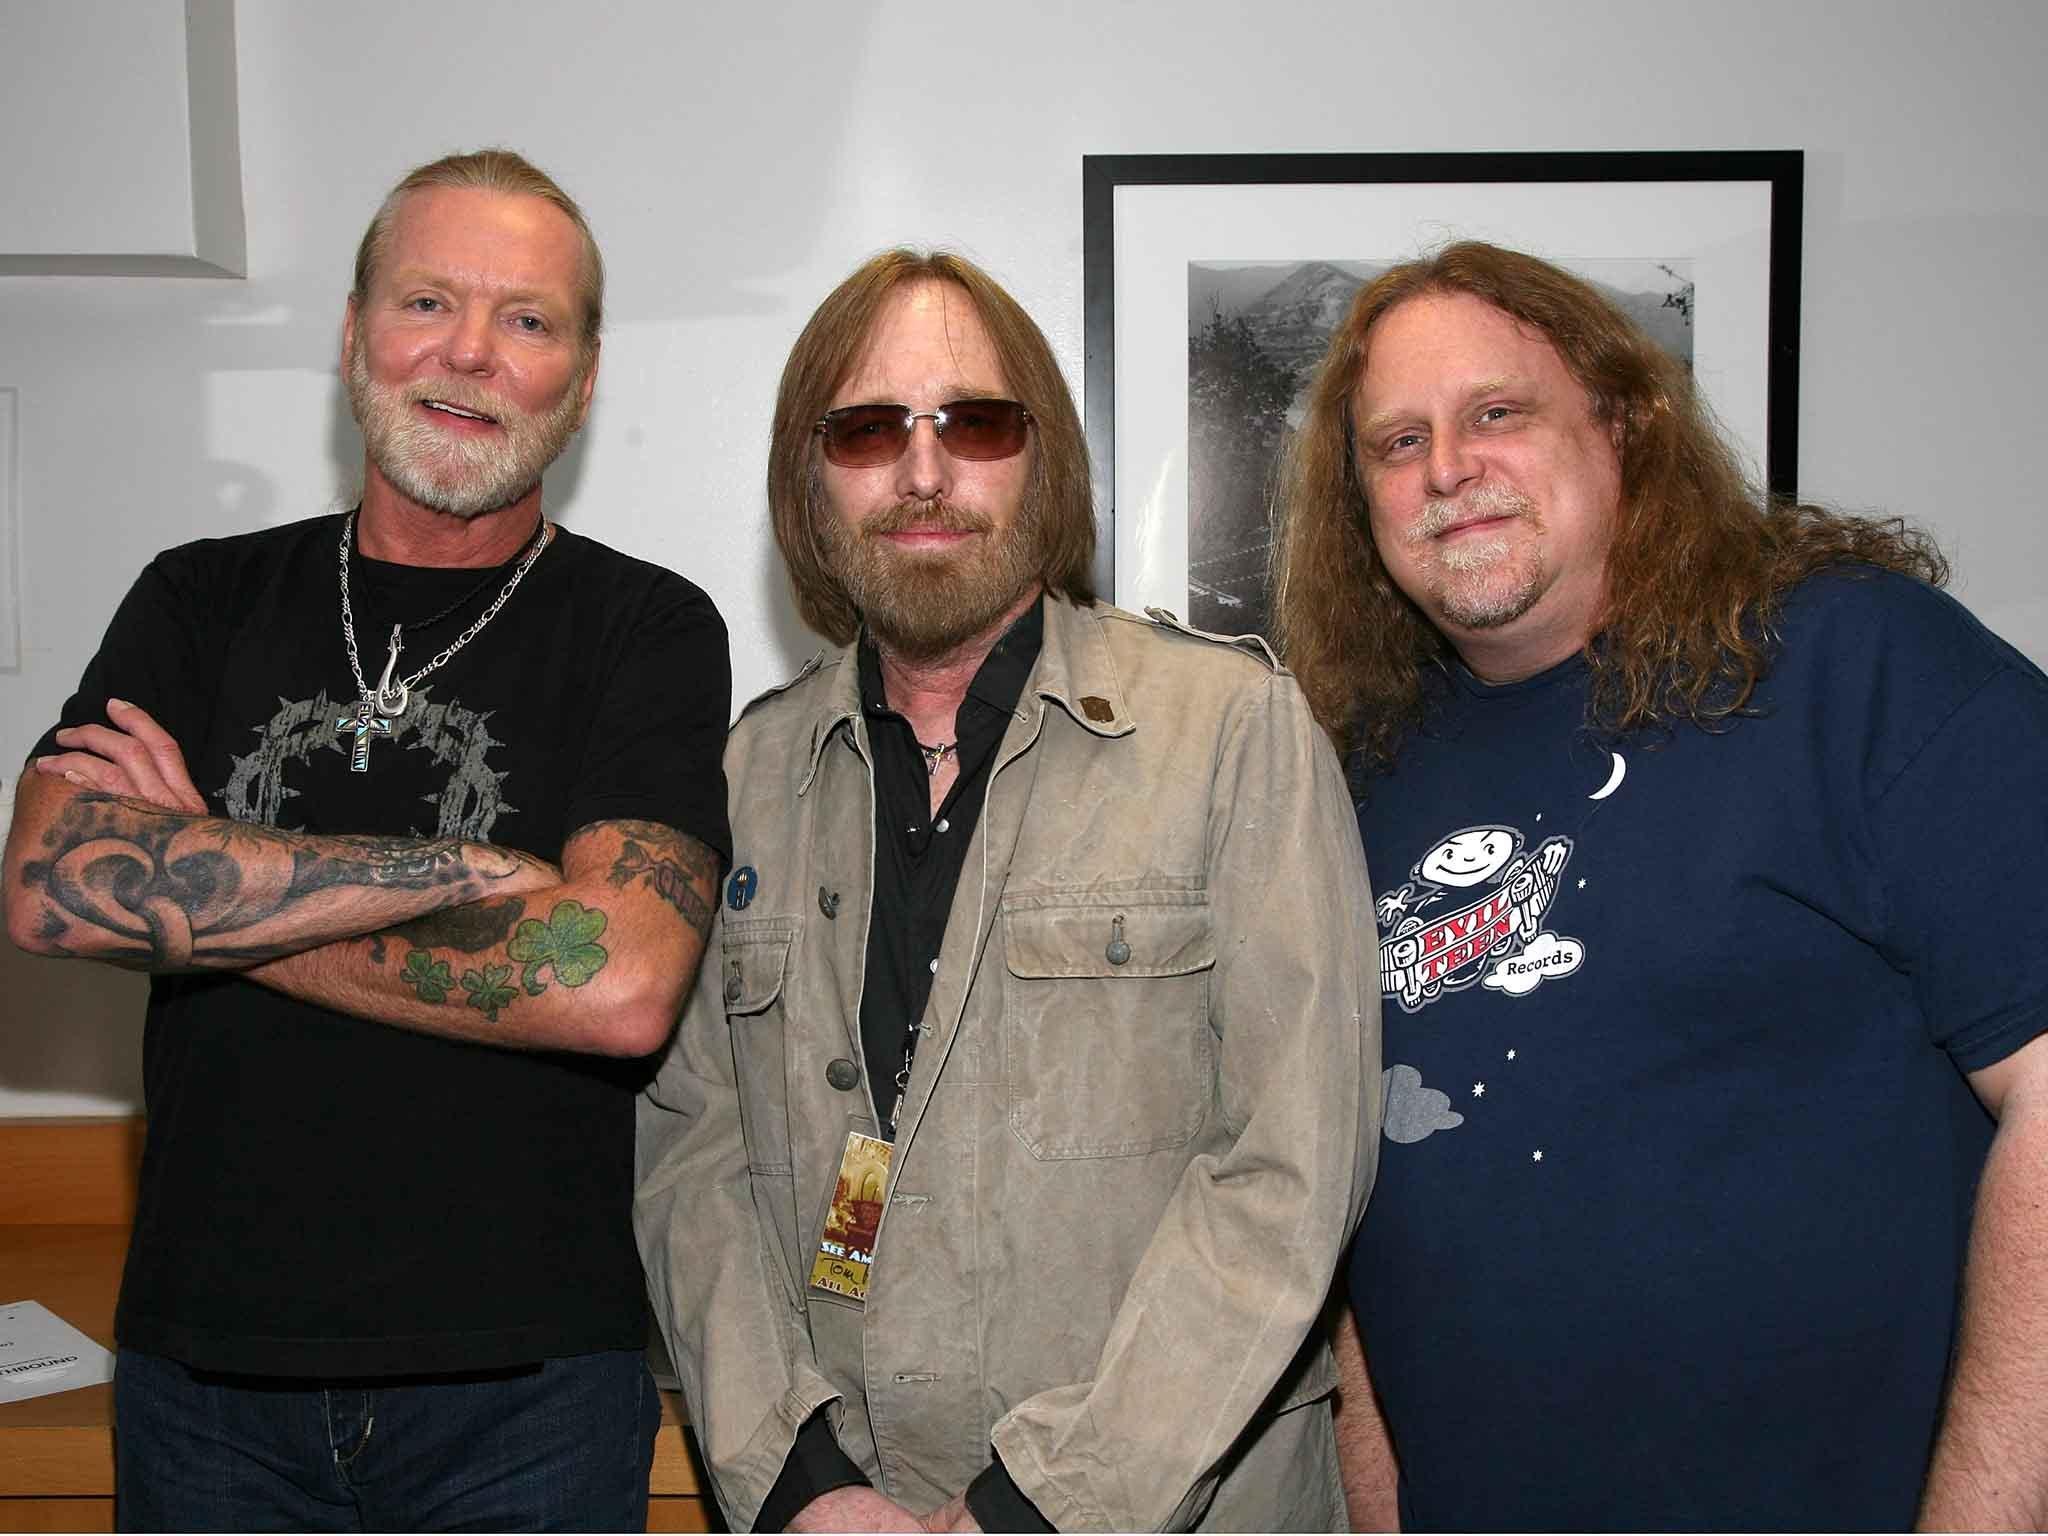 Gregg Allman, Tom Petty and Warren Haynes ready to rock at the Greek Theatre on 19 May, 2009